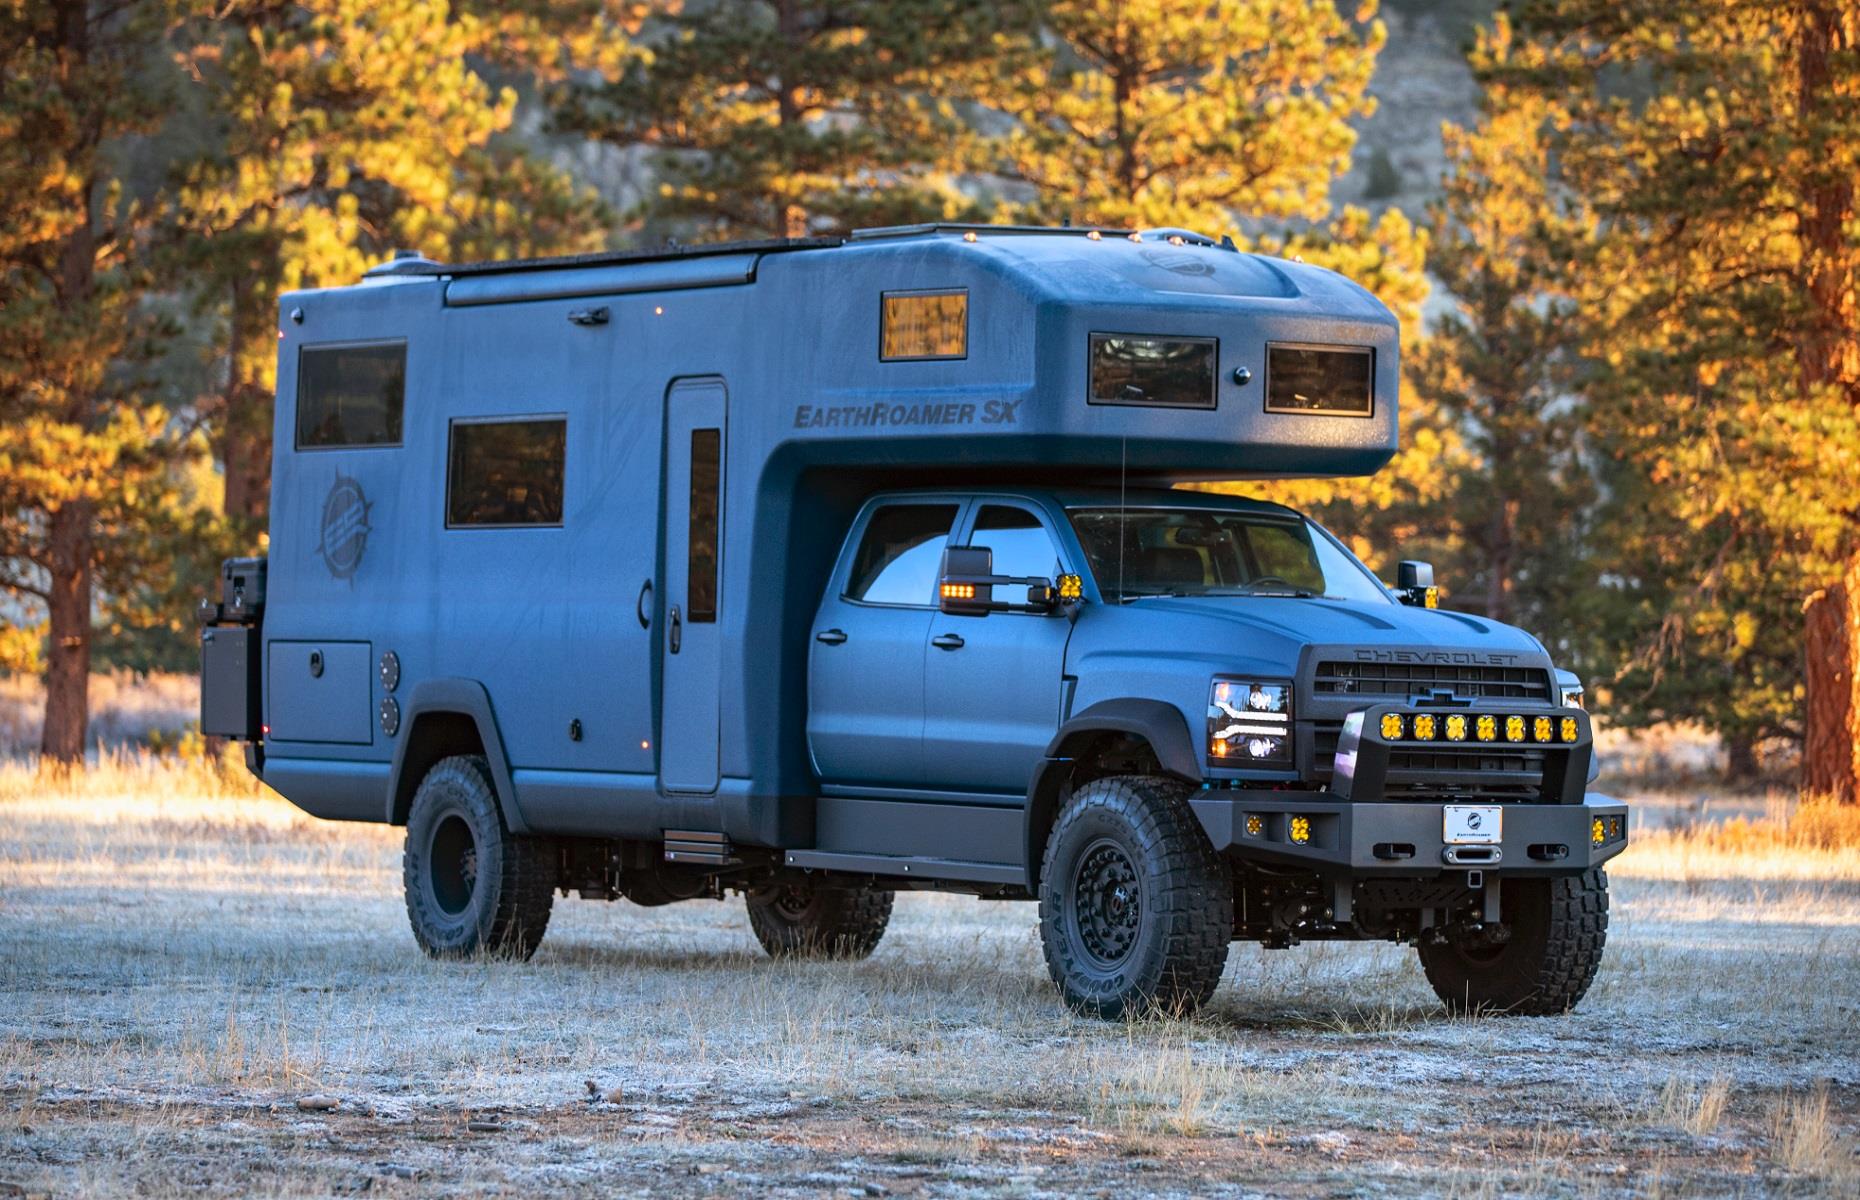 <p>Those seeking a plush motorhome that can handle tough terrains should look no further than the <a href="https://earthroamer.com/sx-explore/#experience-gradient">EarthRoamer SX Explore</a>. Starting at $1.1 million, this brand-new, expedition-grade vehicle can withstand the harshest environments while offering the best in luxury living. The army-inspired RV has an ultra-durable carbon fiber body and a Chevrolet 6500 4WD Chassis, 6.6-litre Turbo Diesel engine, as well as an array of <a href="https://www.loveproperty.com/gallerylist/95567/survivalists-reveal-genius-tips-for-selfsufficient-living">self-sufficient</a> extras to help you travel off the beaten track for longer.</p>